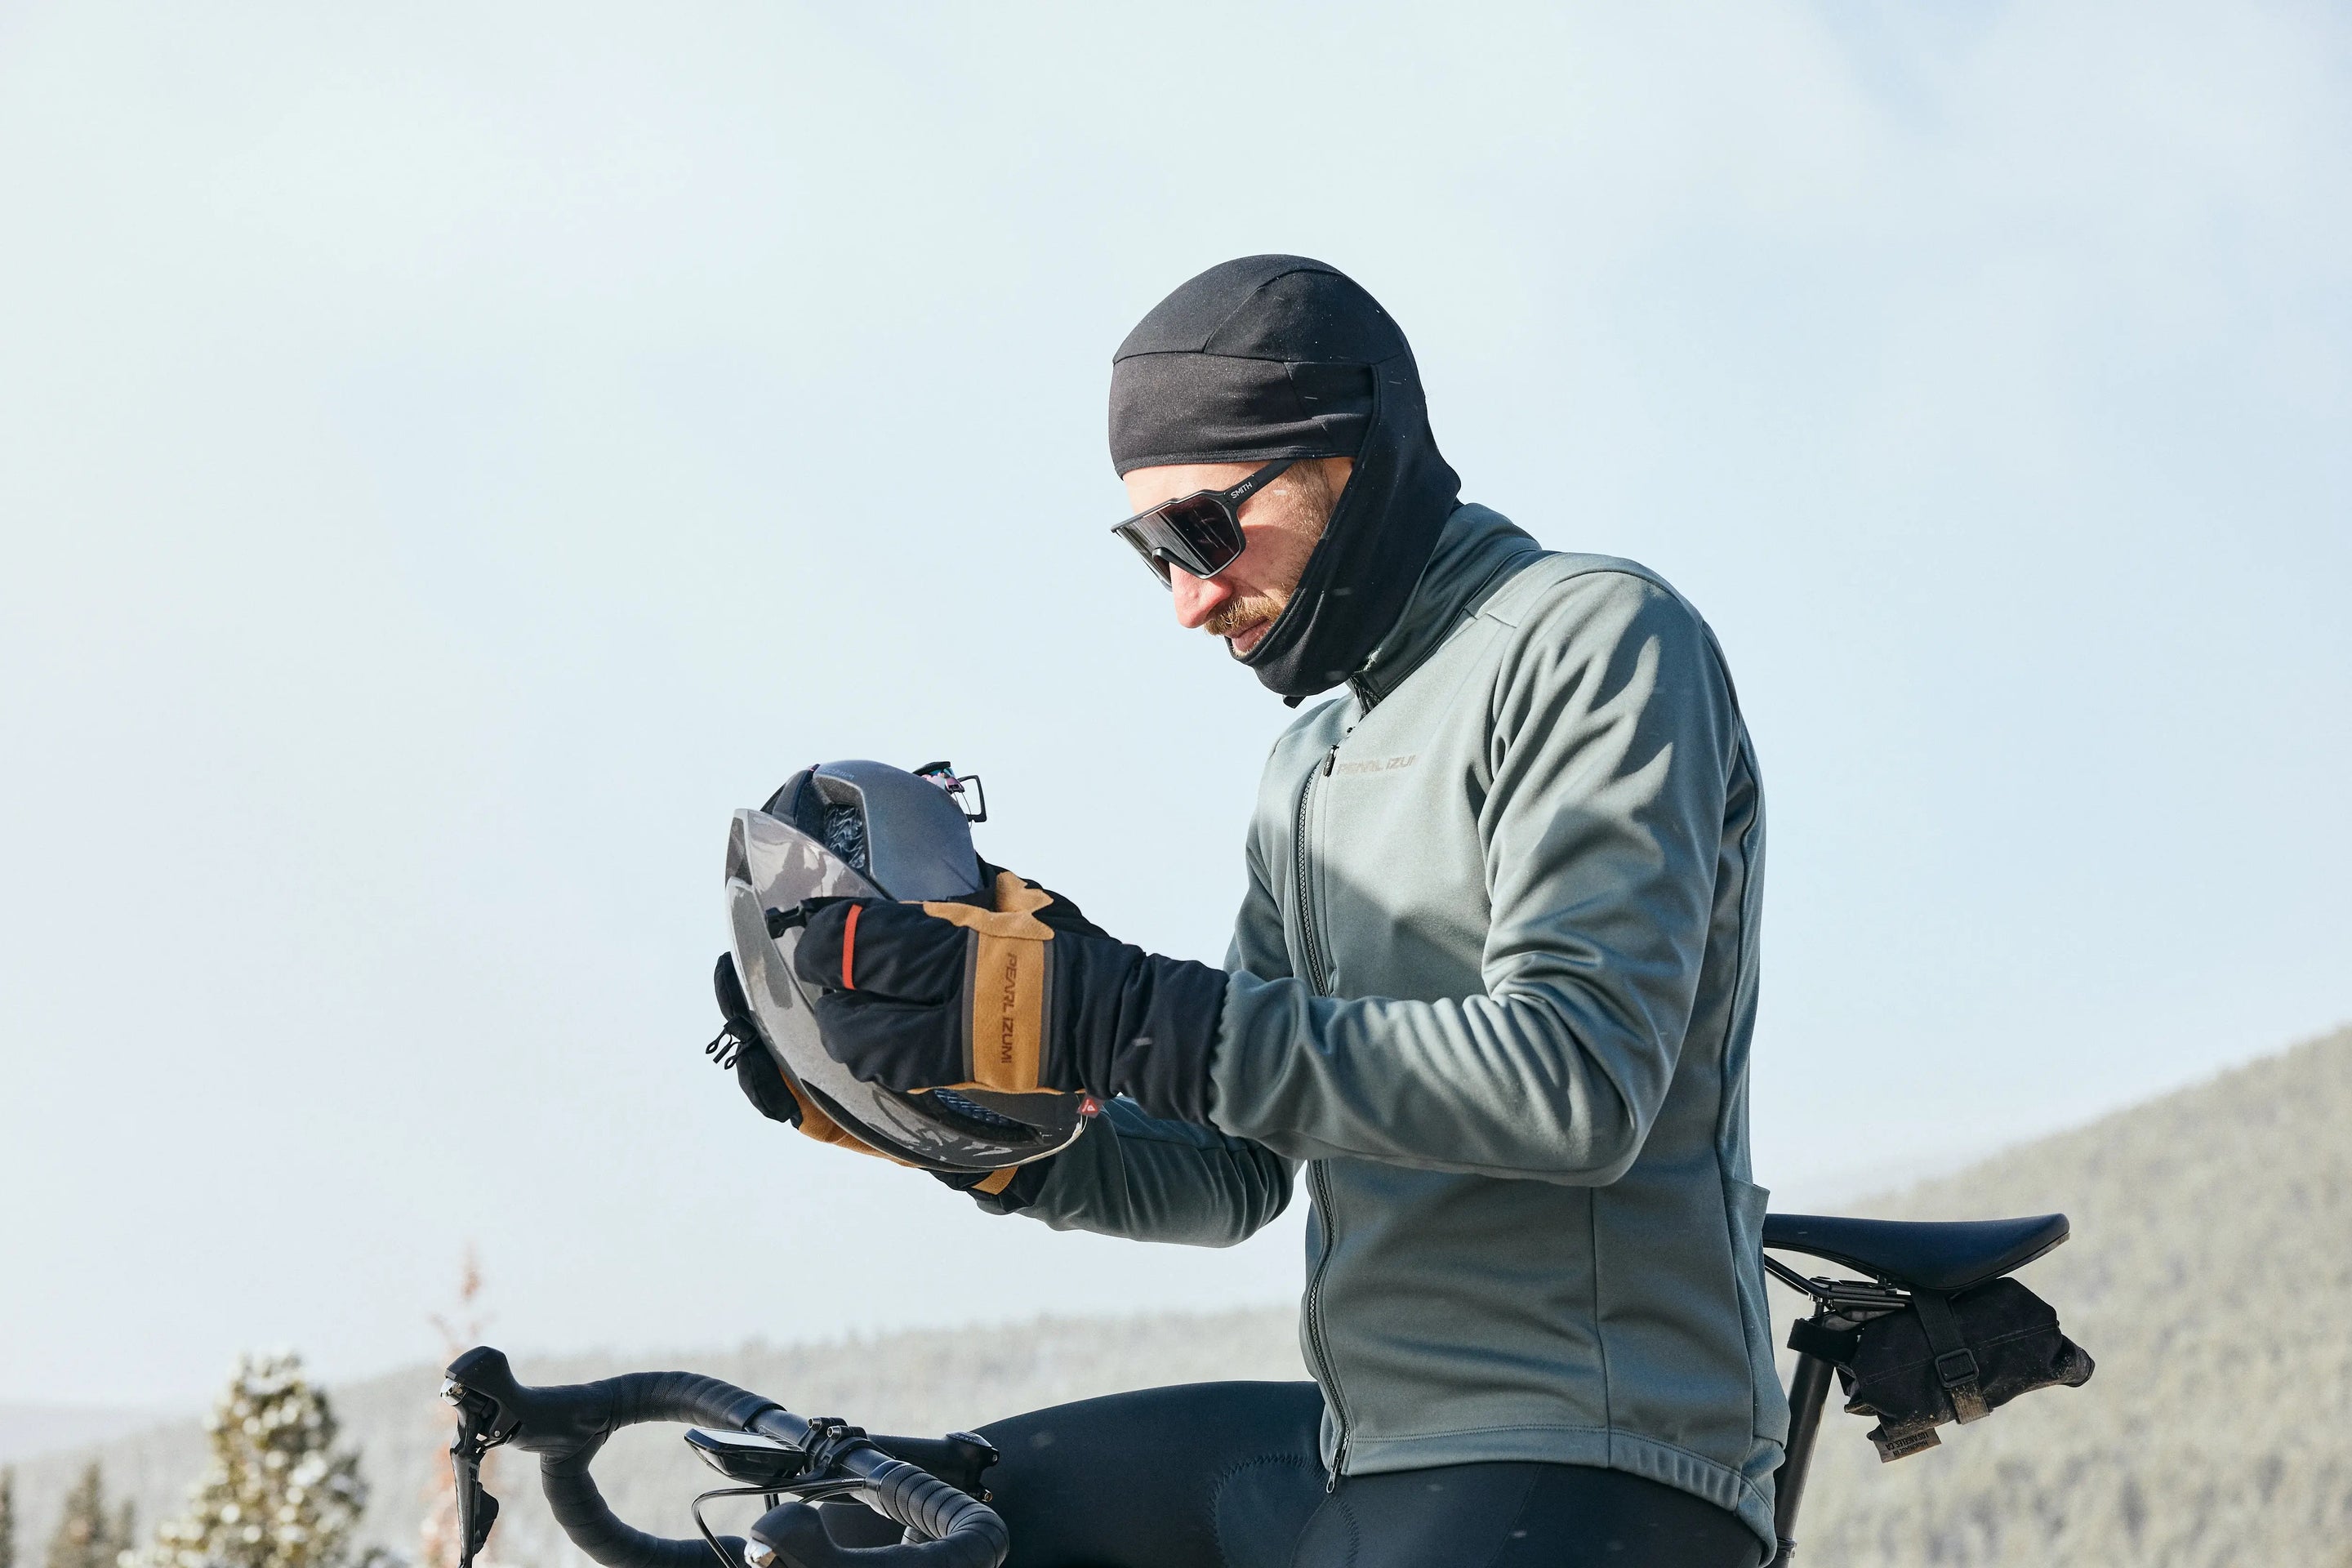 Male cyclist preparing to go ride in the cold while wearing PEARL iZUMi Lobster Gloves